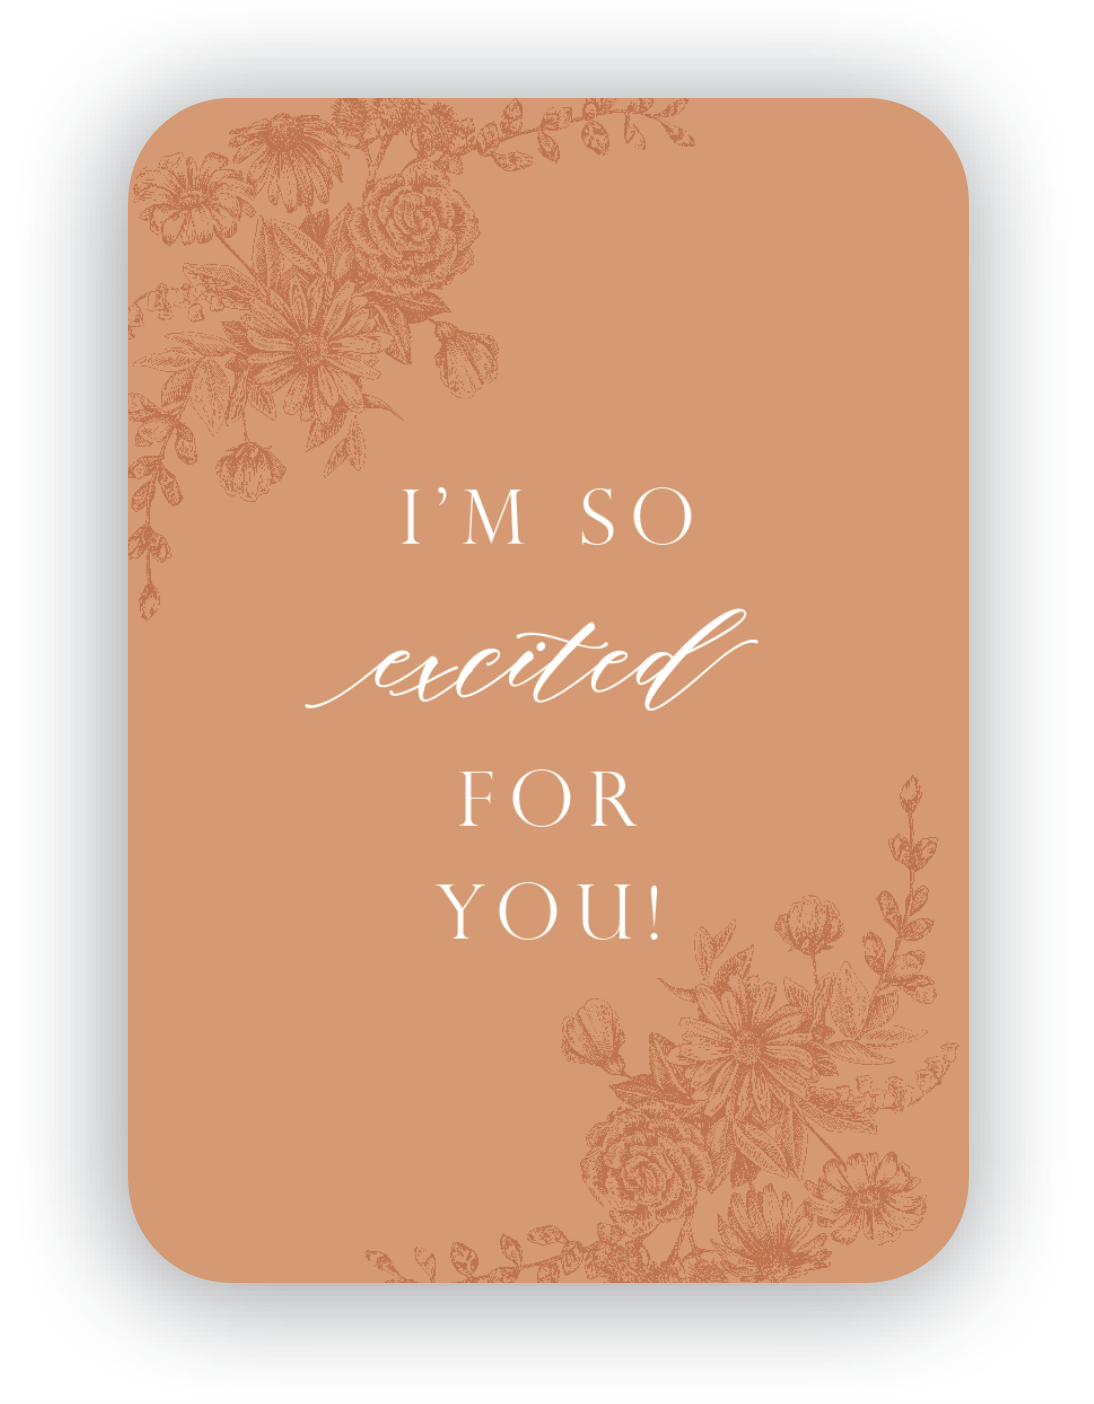 Digital burnt orange mini card with florals that says "I'm so excited for you!" by Rust Belt Love